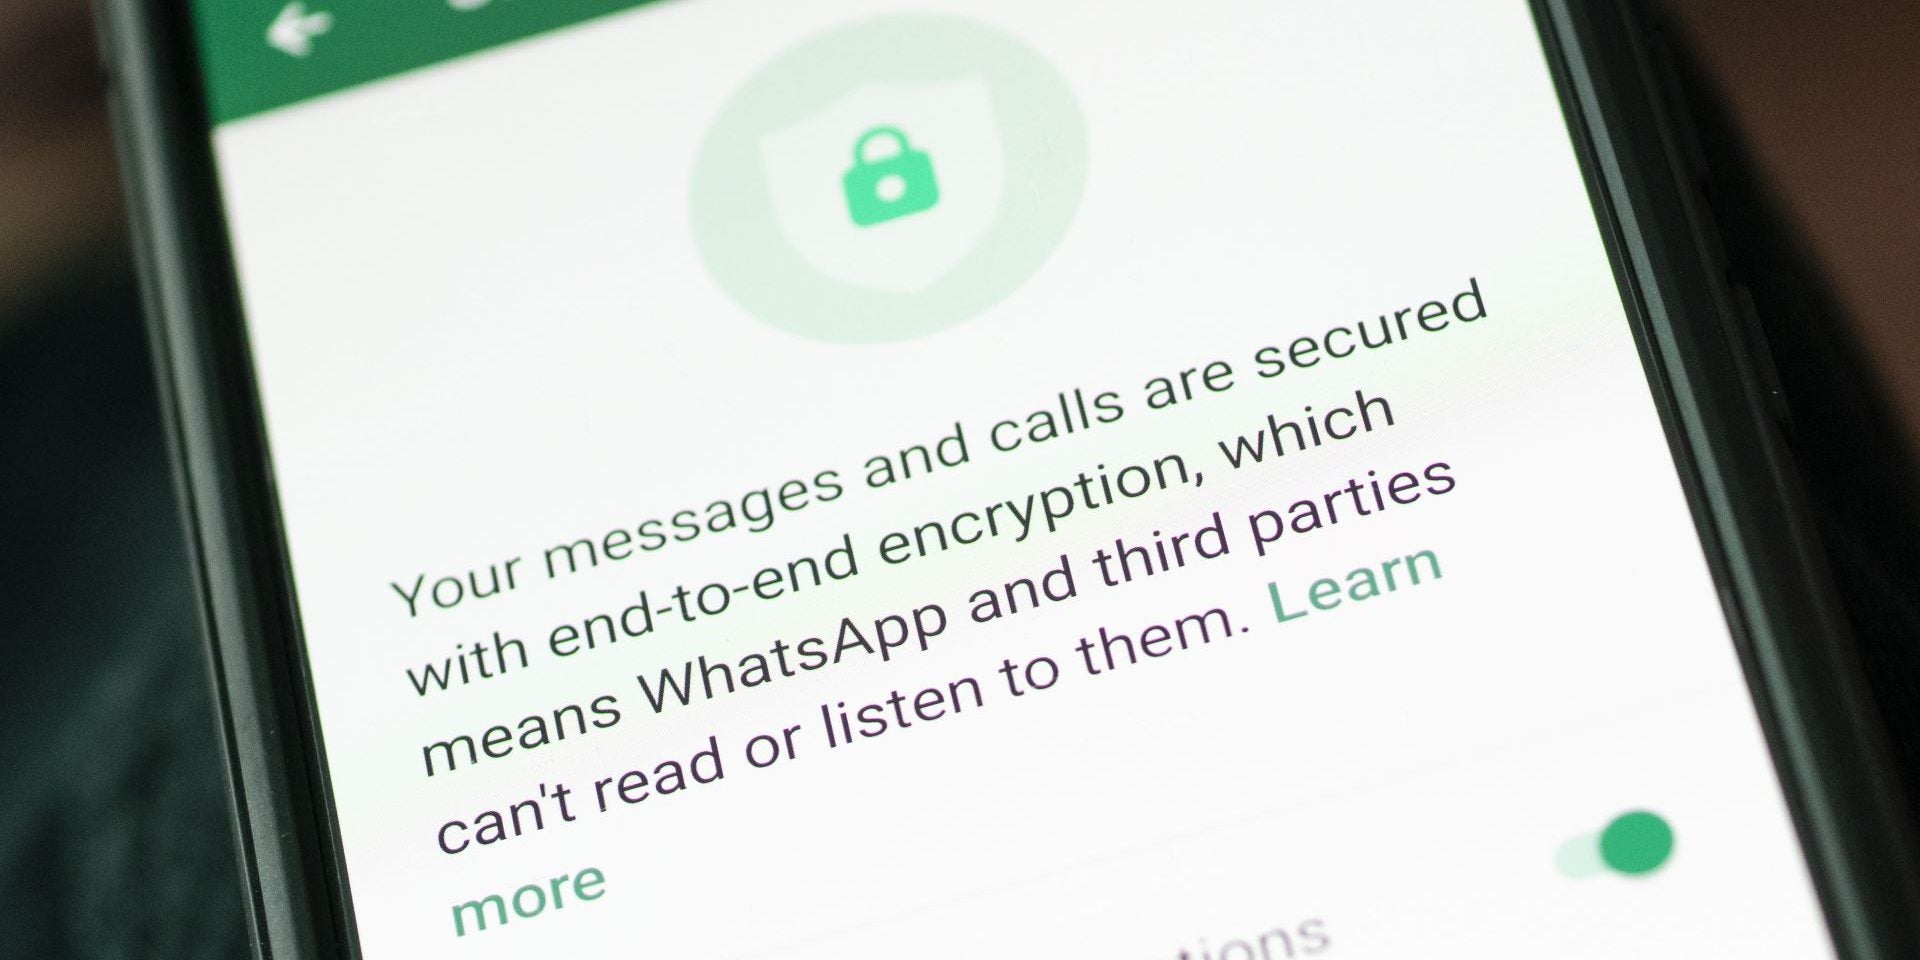 The IT Rules 2021 demand tracing the origin of messages, challenging privacy